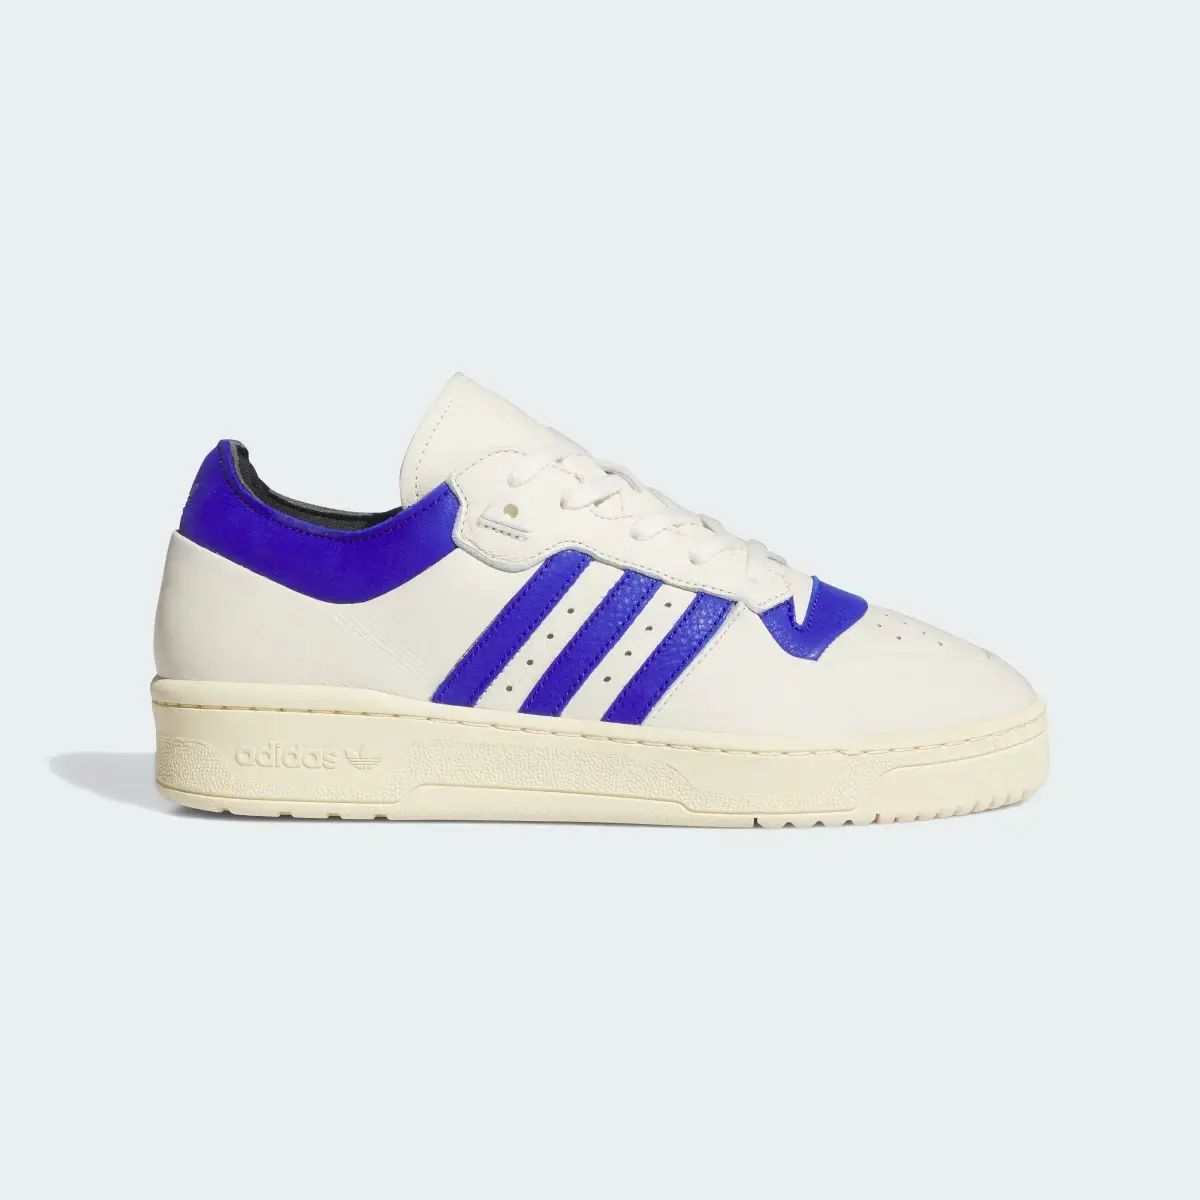 Adidas Sapatilhas Rivalry 86 Low. 2